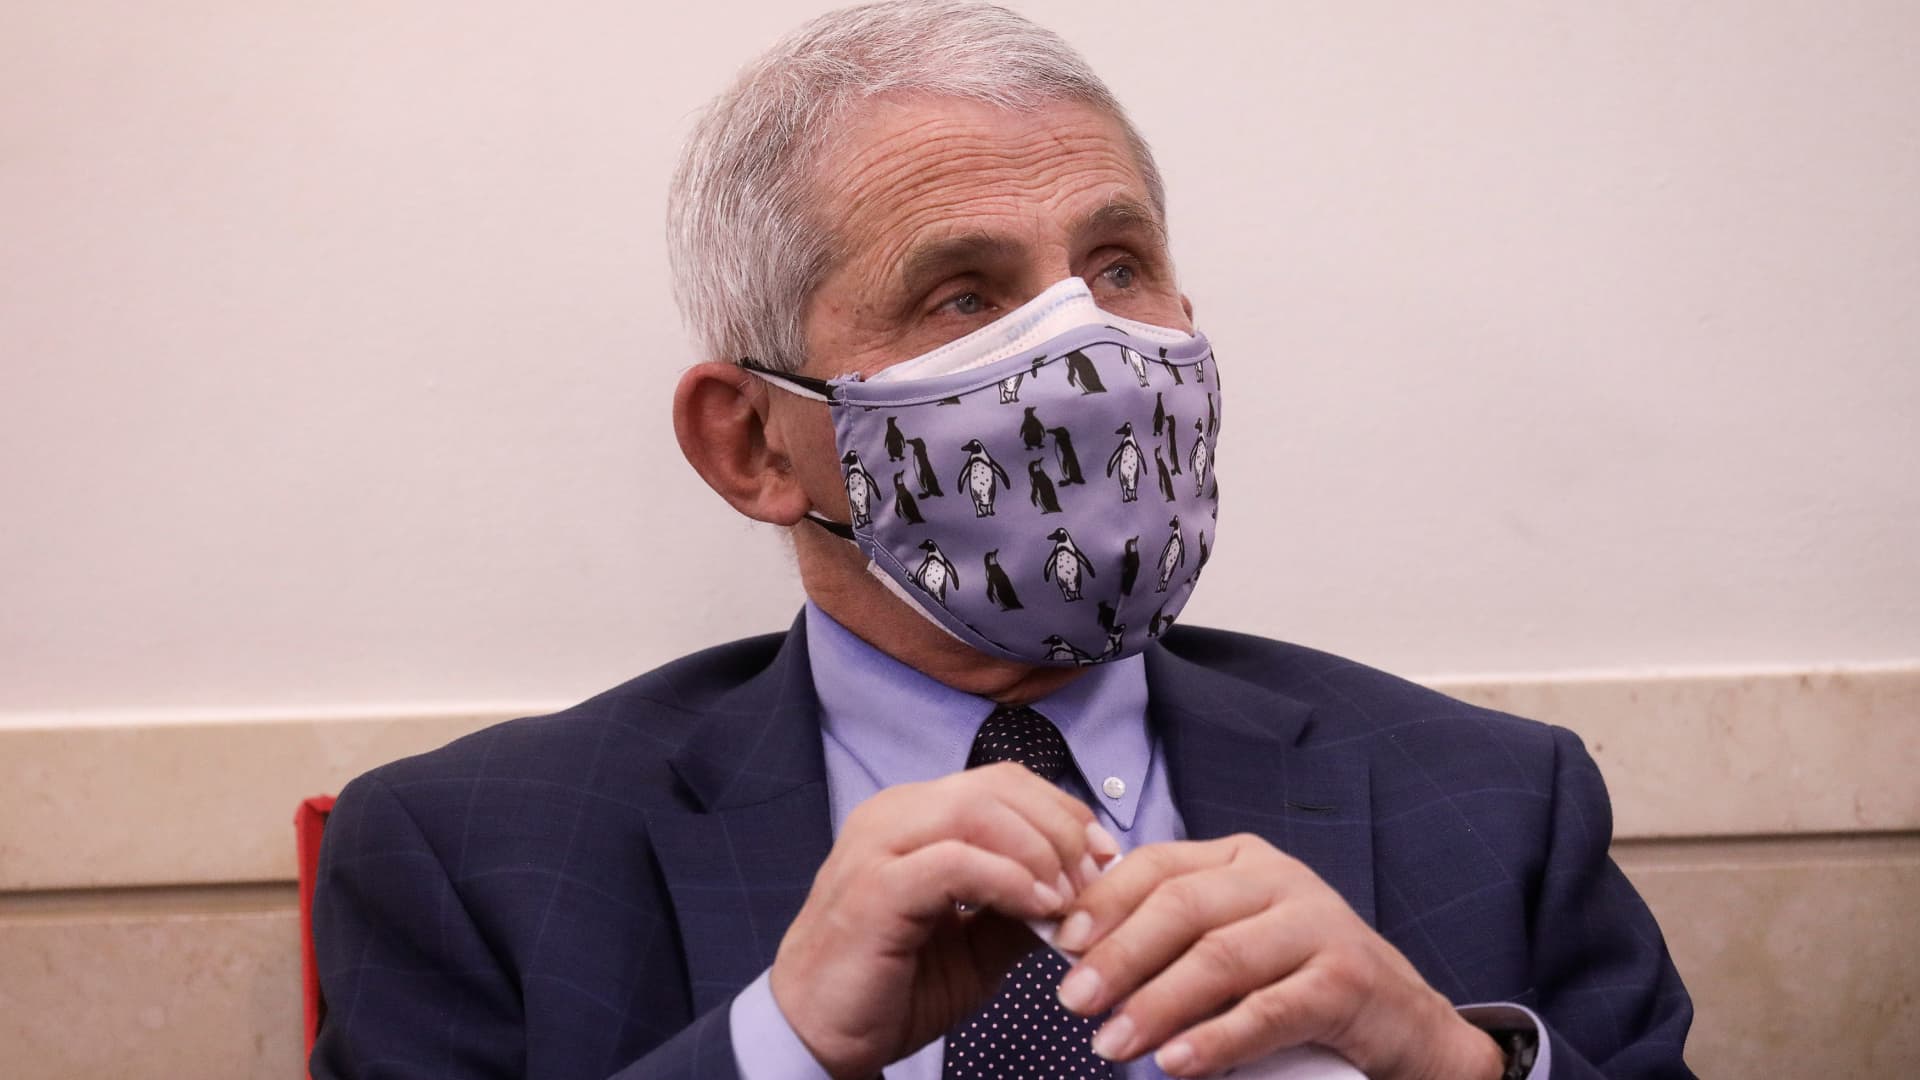 Dr. Anthony Fauci, director of the National Institute of Allergy and Infectious Diseases, attends a briefing by the White House coronavirus task force in the Brady press briefing room at the White House in Washington, U.S., November 19, 2020.